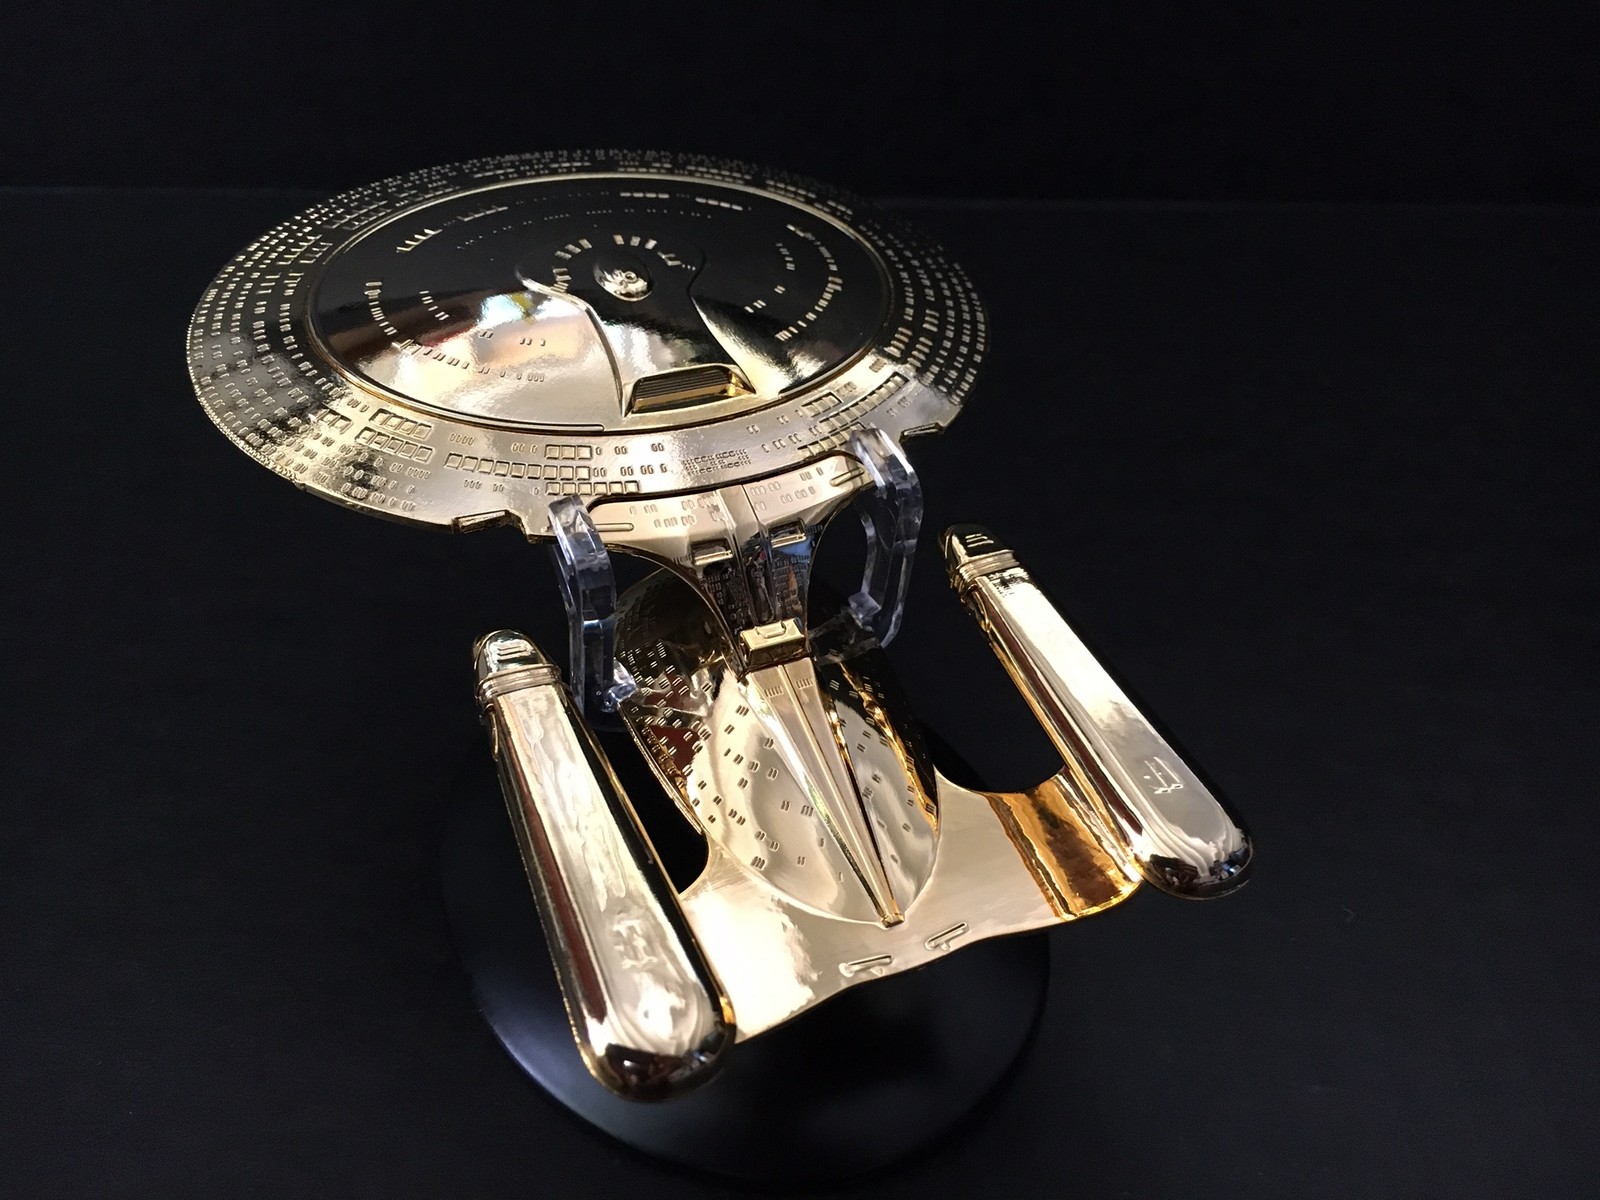 U.S.S Star Trek The Official Starships Collection Enterprise NCC-1701-D 18K Gold Plated XL Edition by Eaglemoss Hero Collector